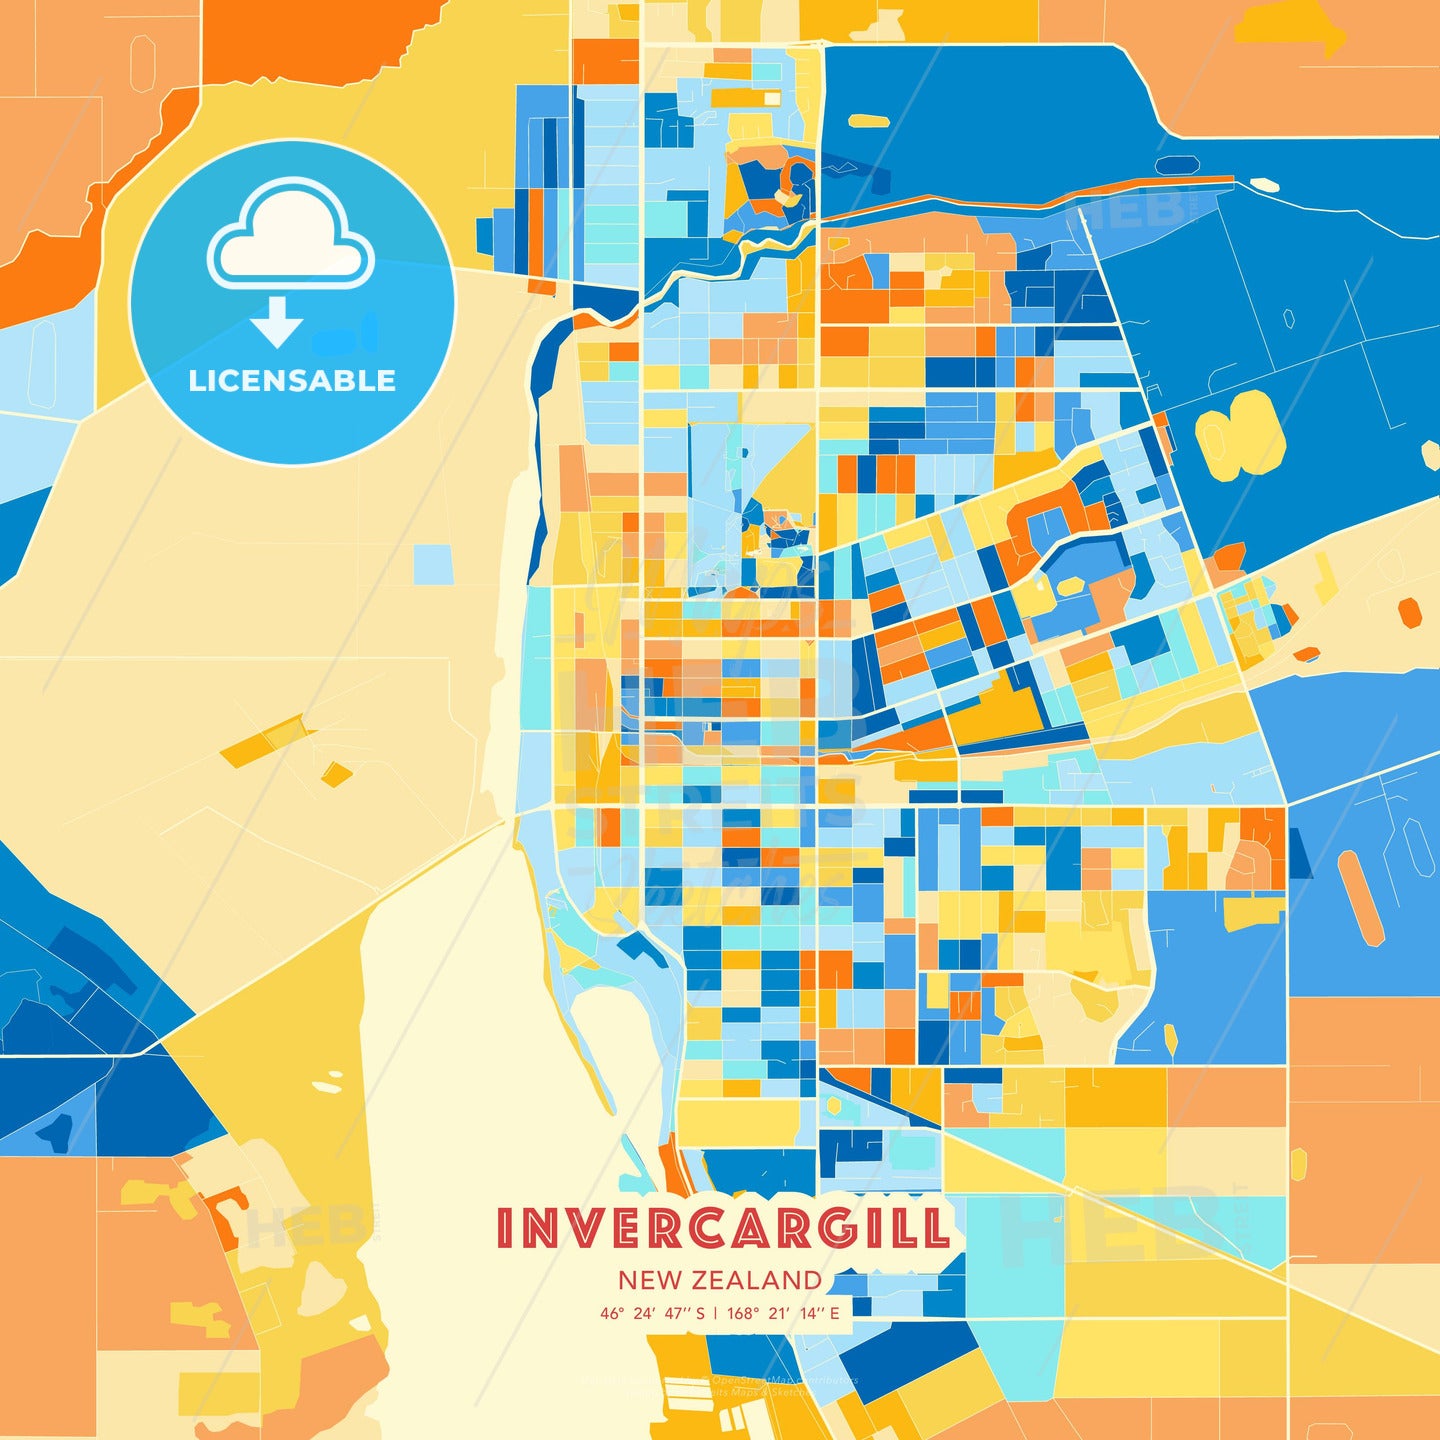 Invercargill, New Zealand, map - HEBSTREITS Sketches